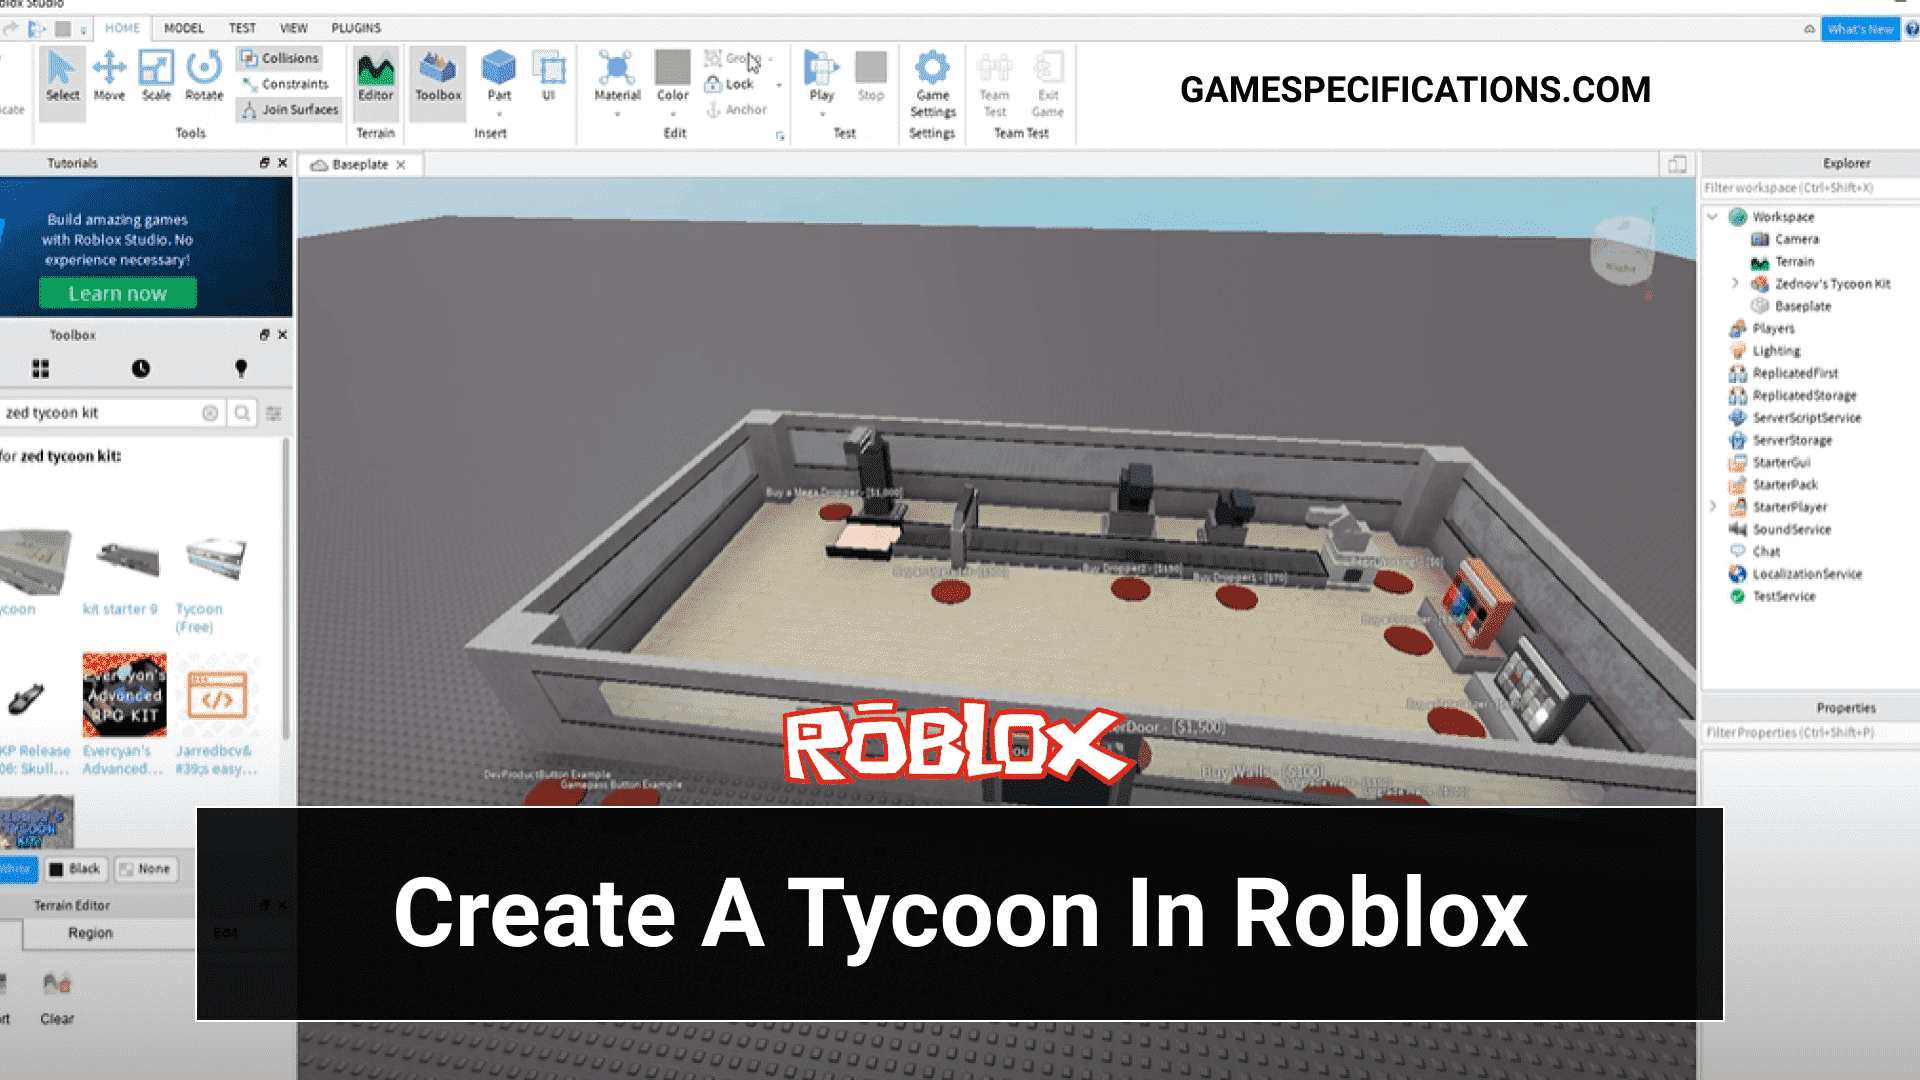 A Complete Guide On How To Make A Tycoon On Roblox Game Specifications - roblox games studios